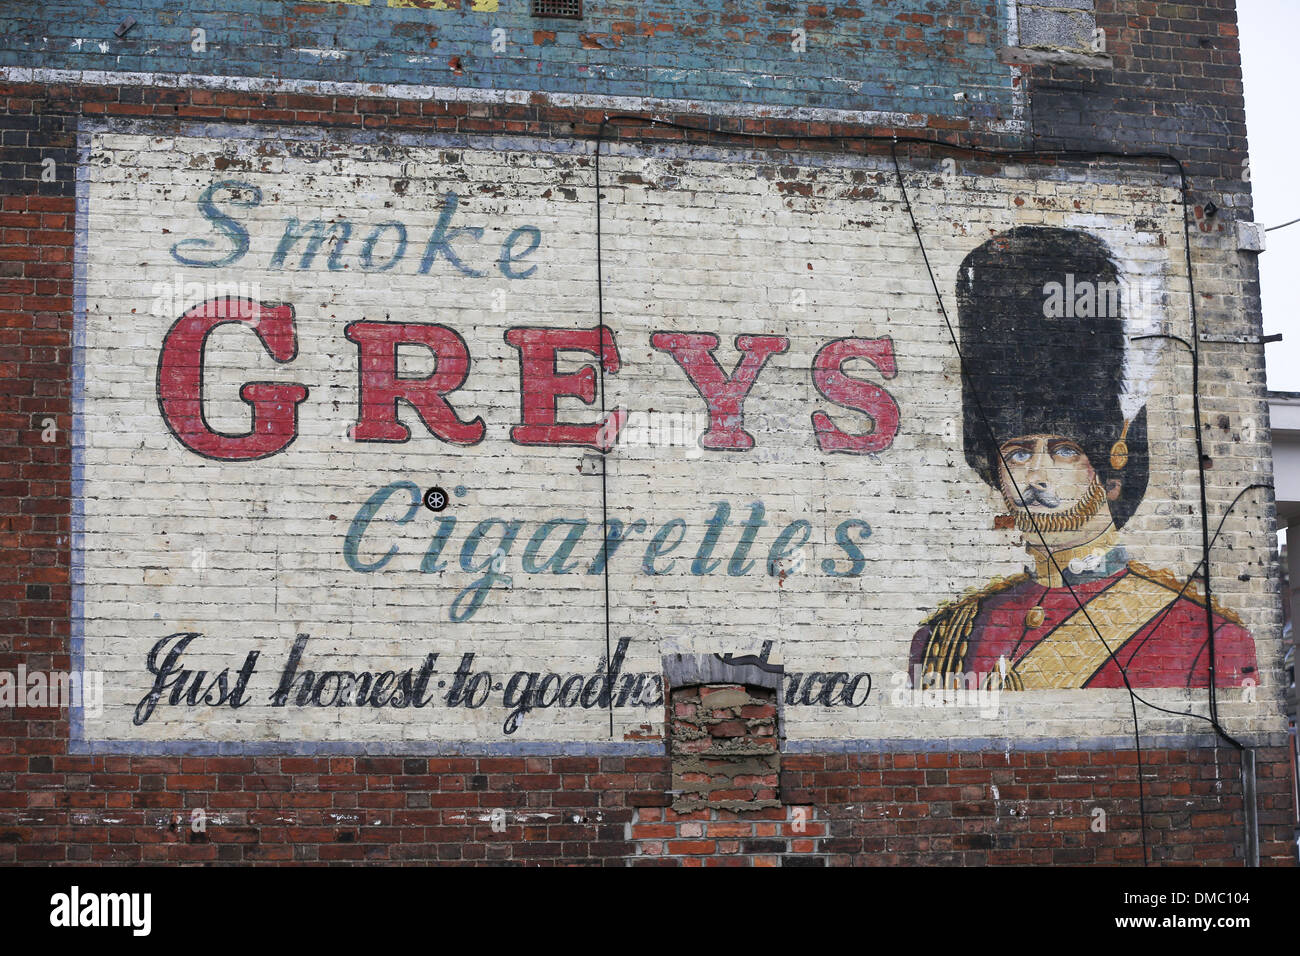 GREYS CIGARETTES ADVERT ON THE WALL OF A BUILDING IN BEDFORD AND BOVRIL. Stock Photo